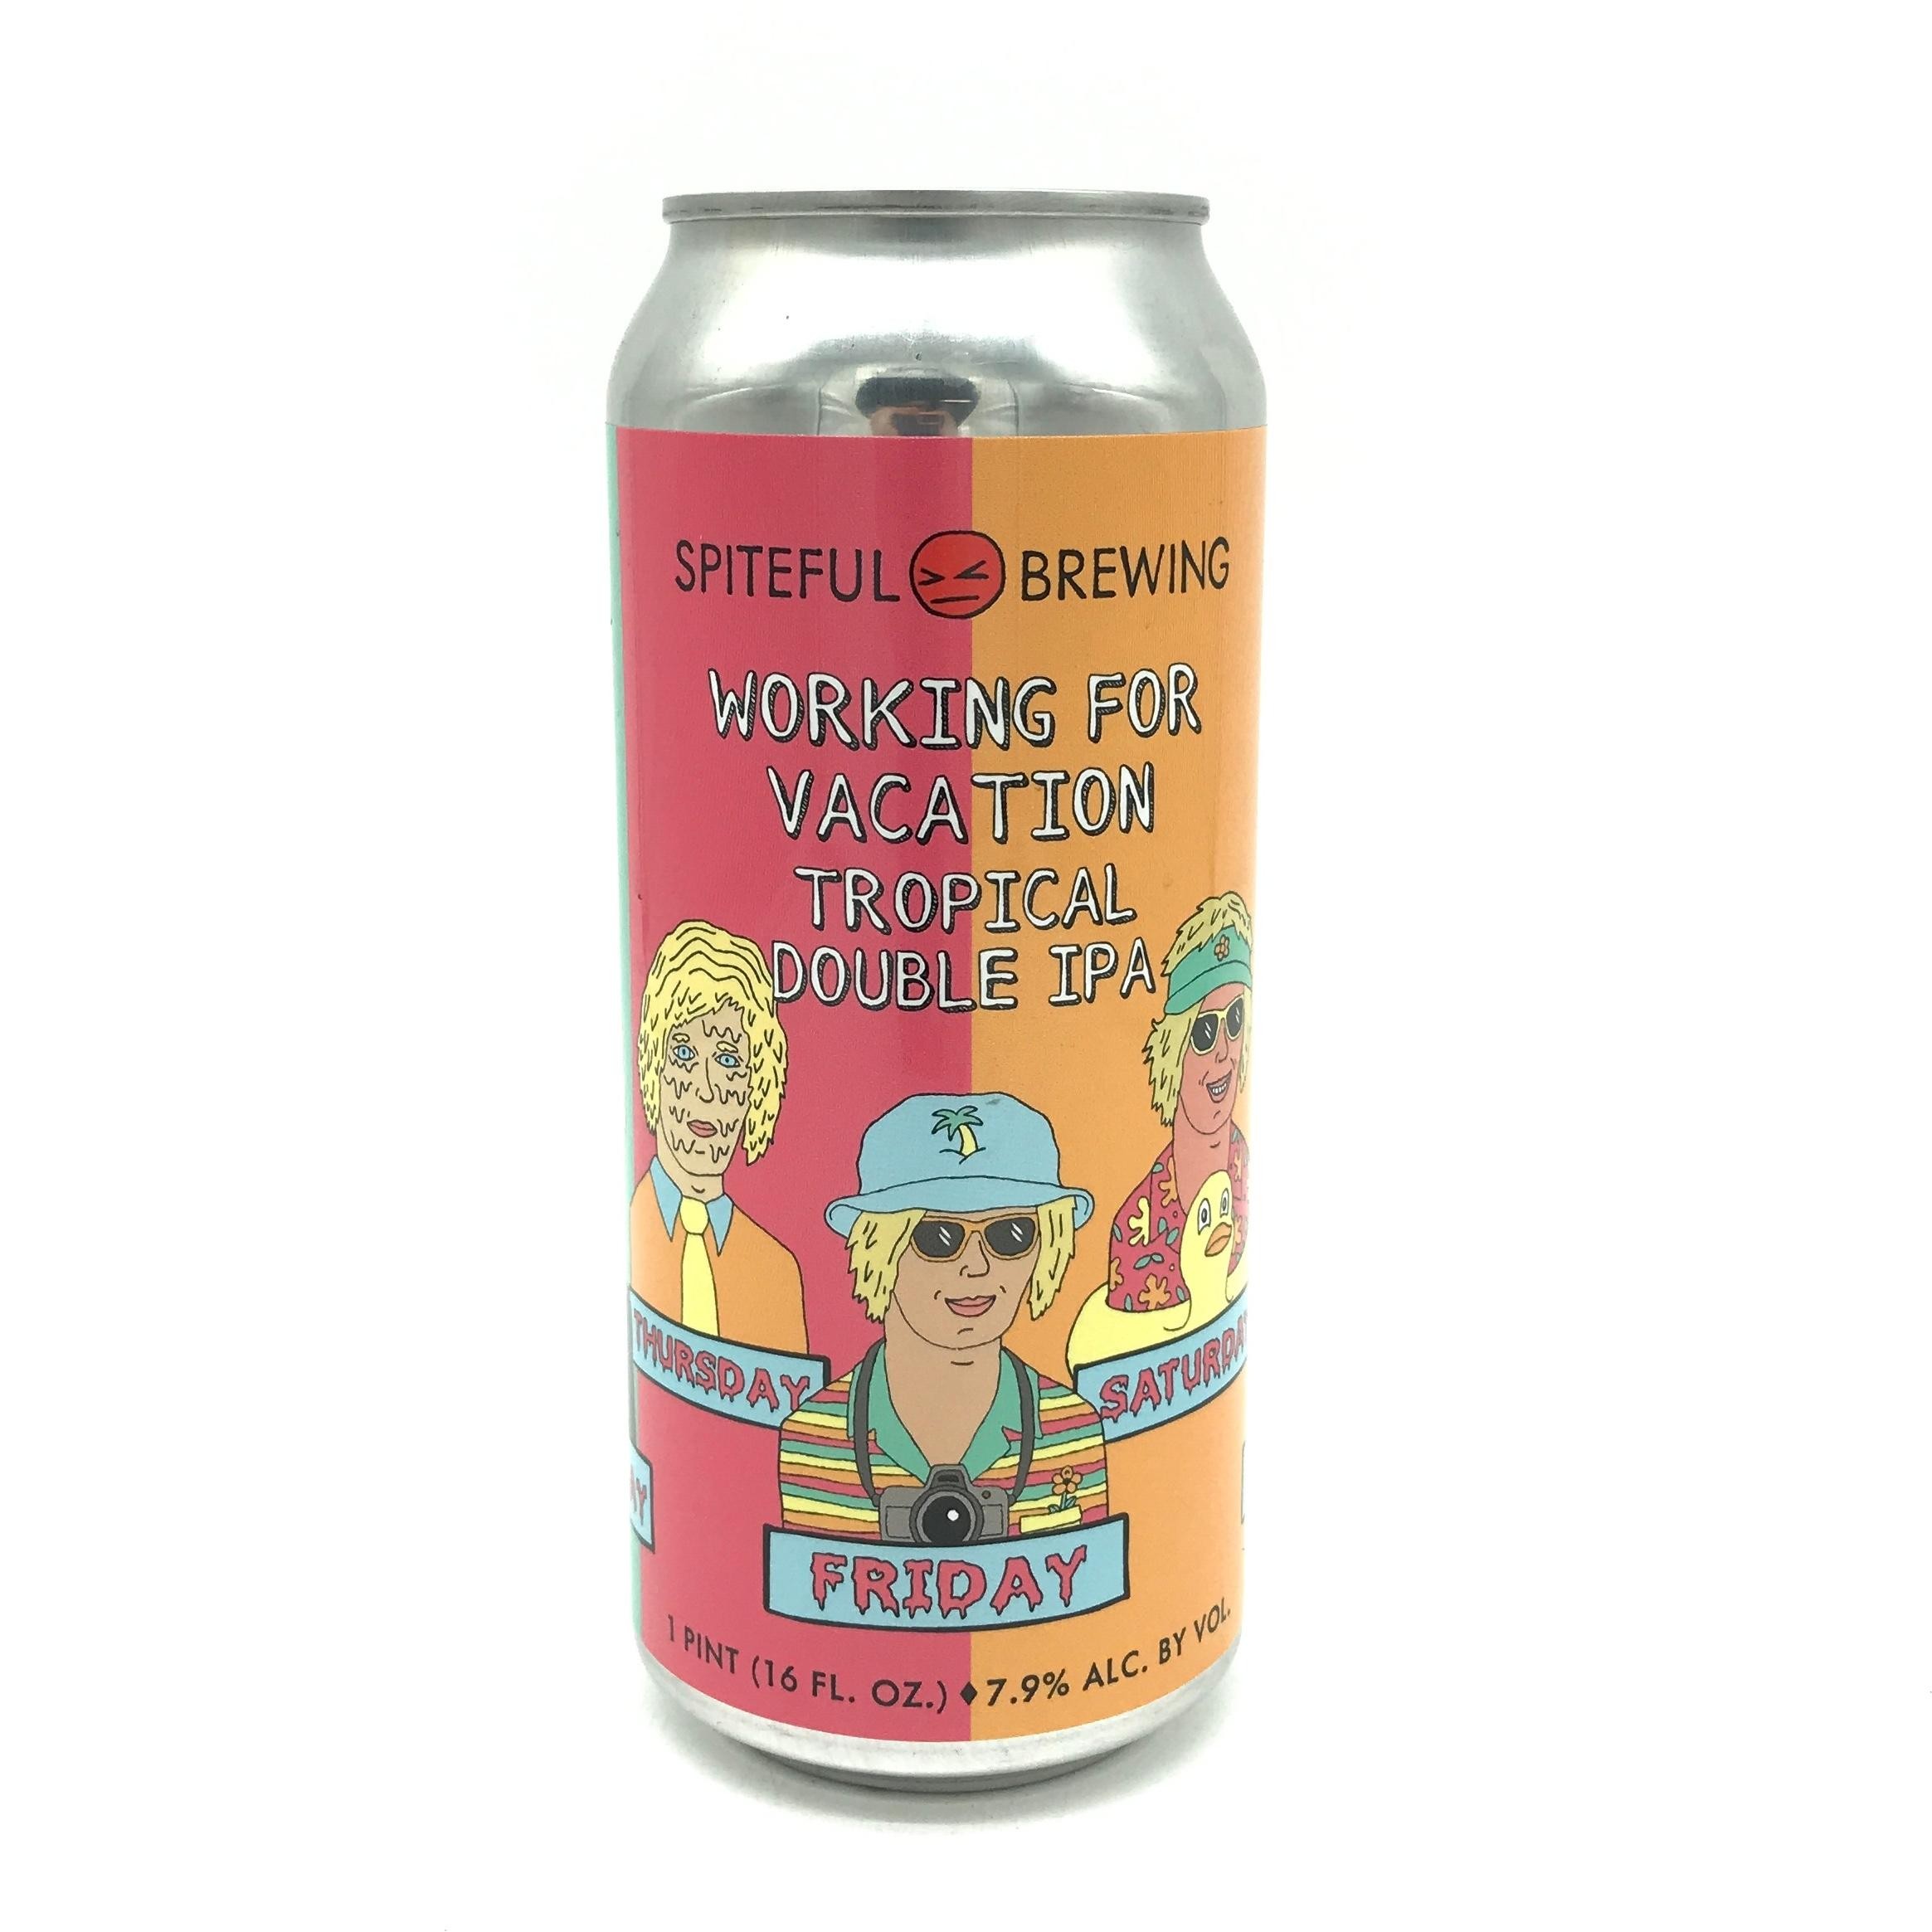 Spiteful - Working for Vacation (Tropical Double IPA)